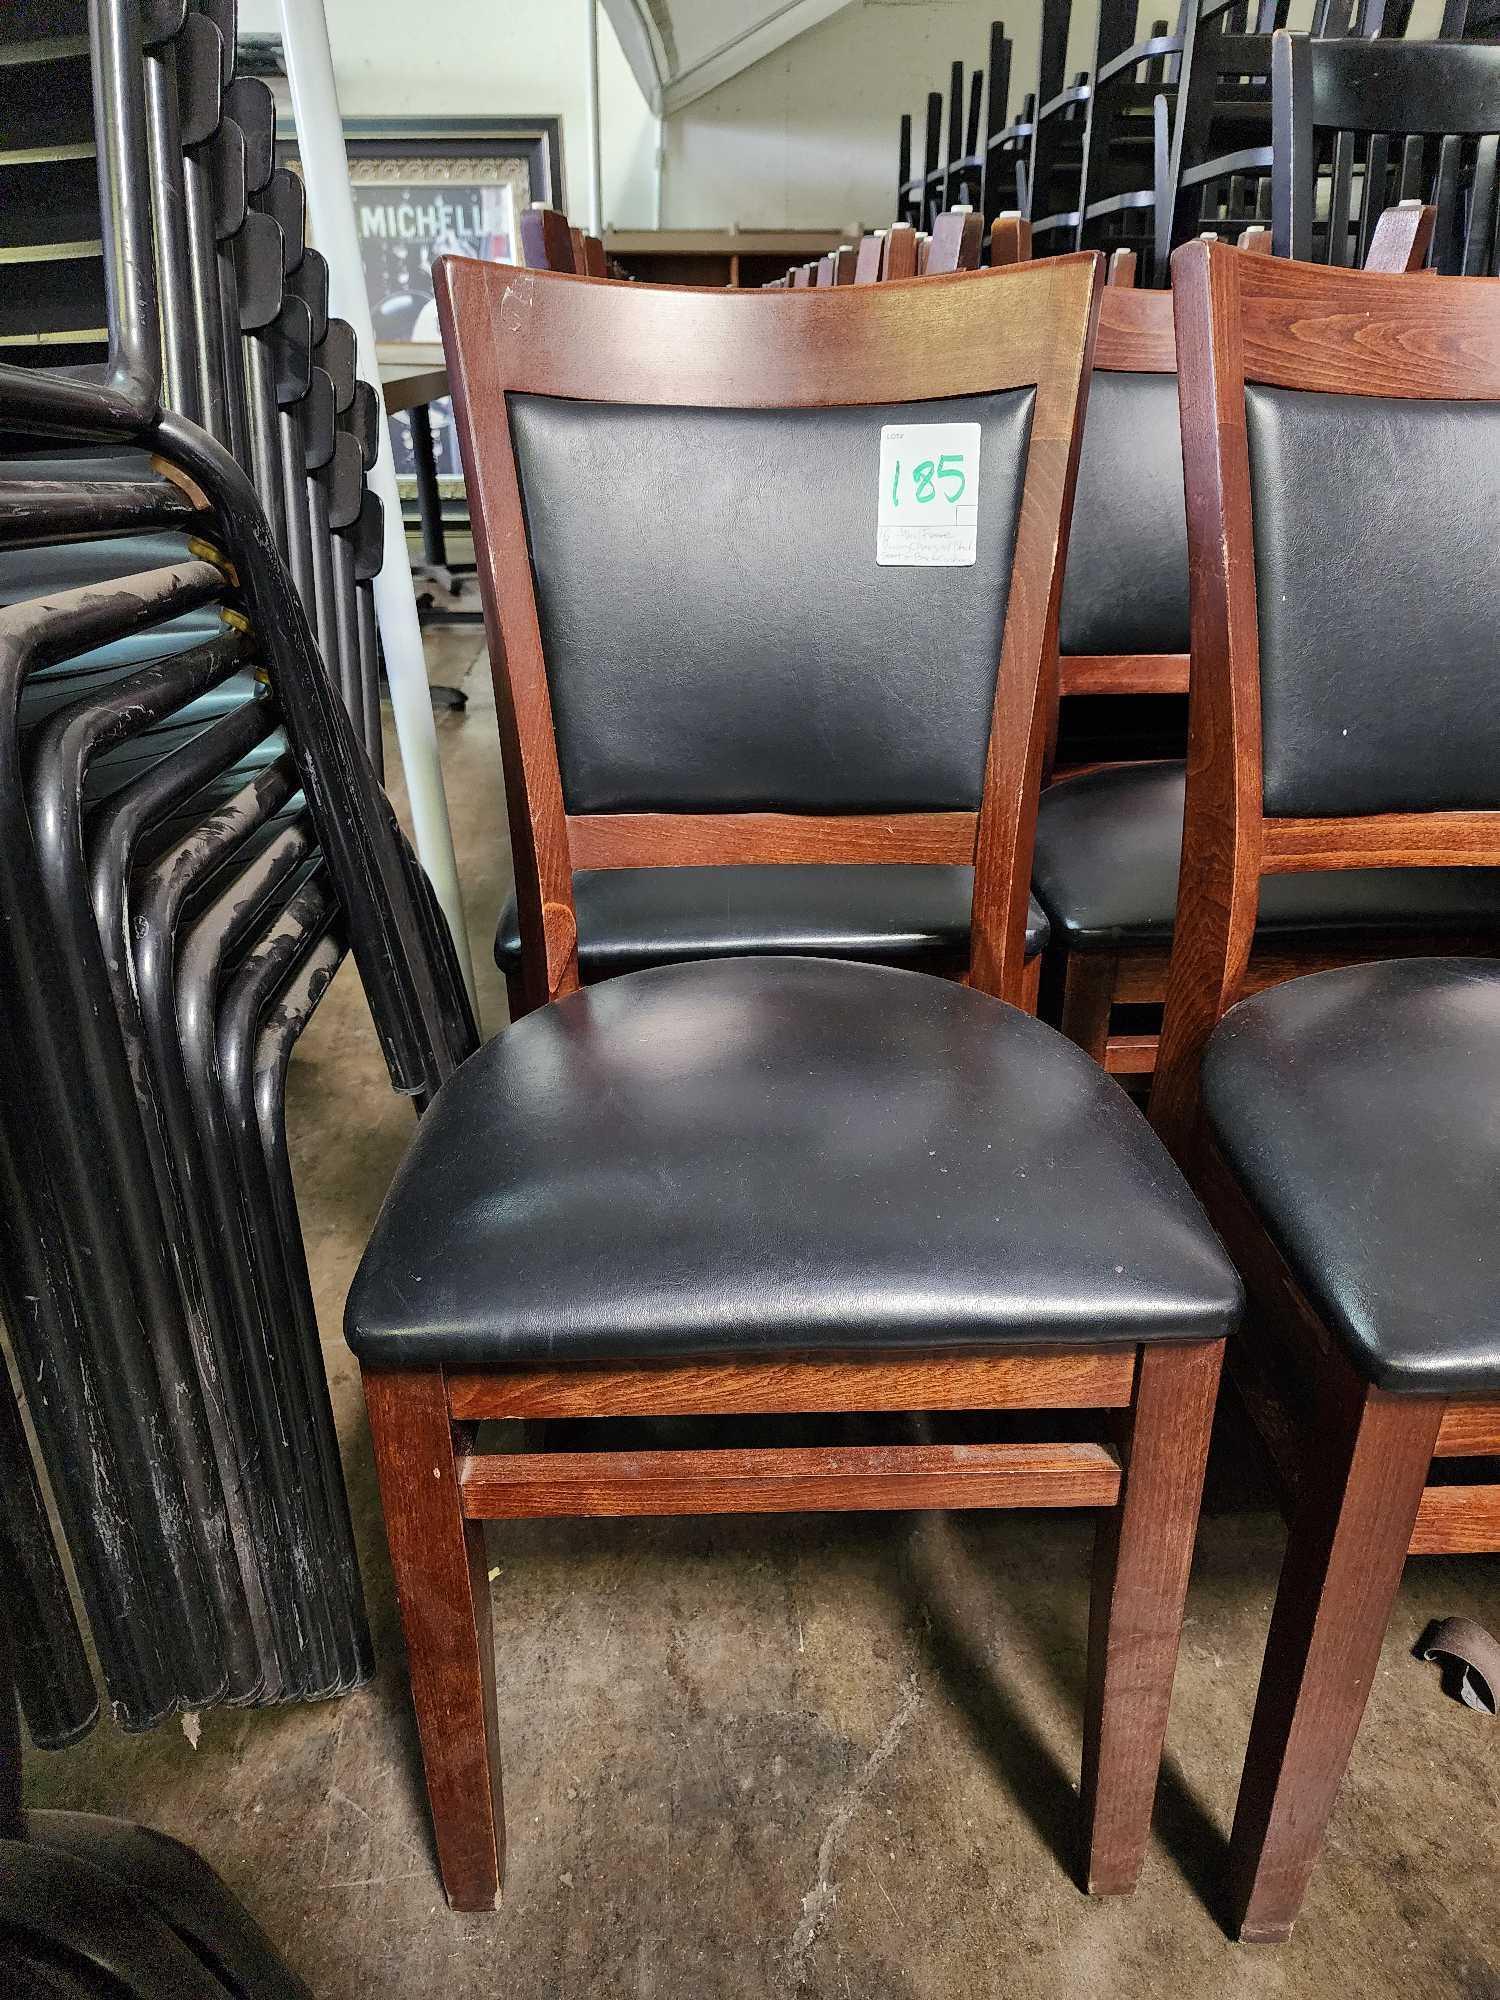 Wood Frame Dining Chairs with Black Seat and Back Cushions